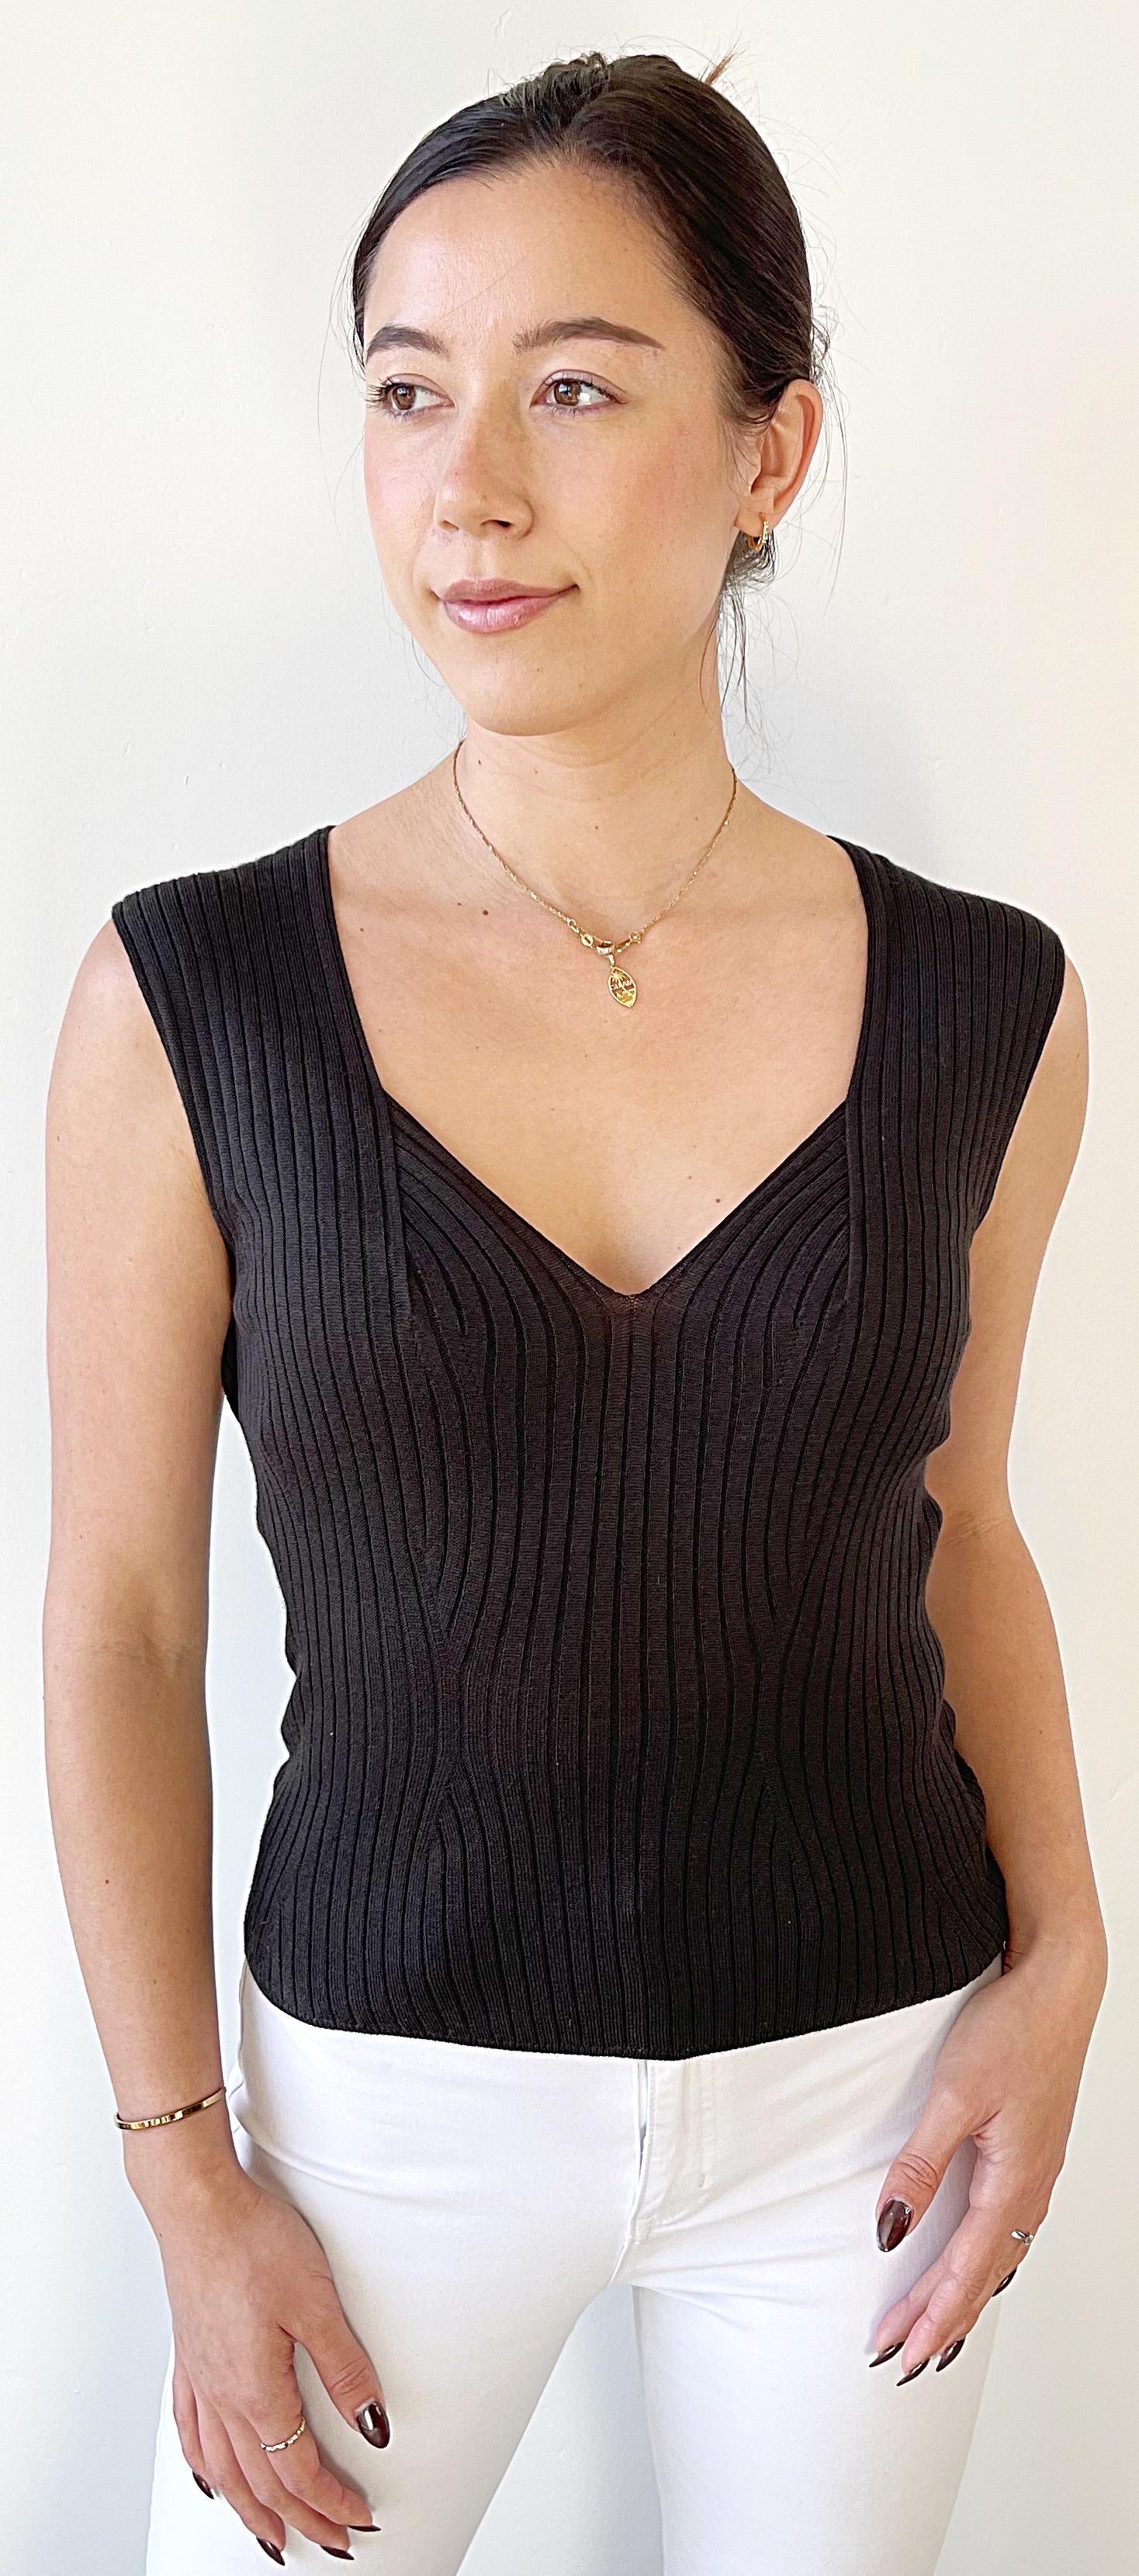 Yves Saint Laurent by Tom Ford Spring 2003 Brown Ribbed Sleeveless Vintage Top In Excellent Condition For Sale In San Diego, CA